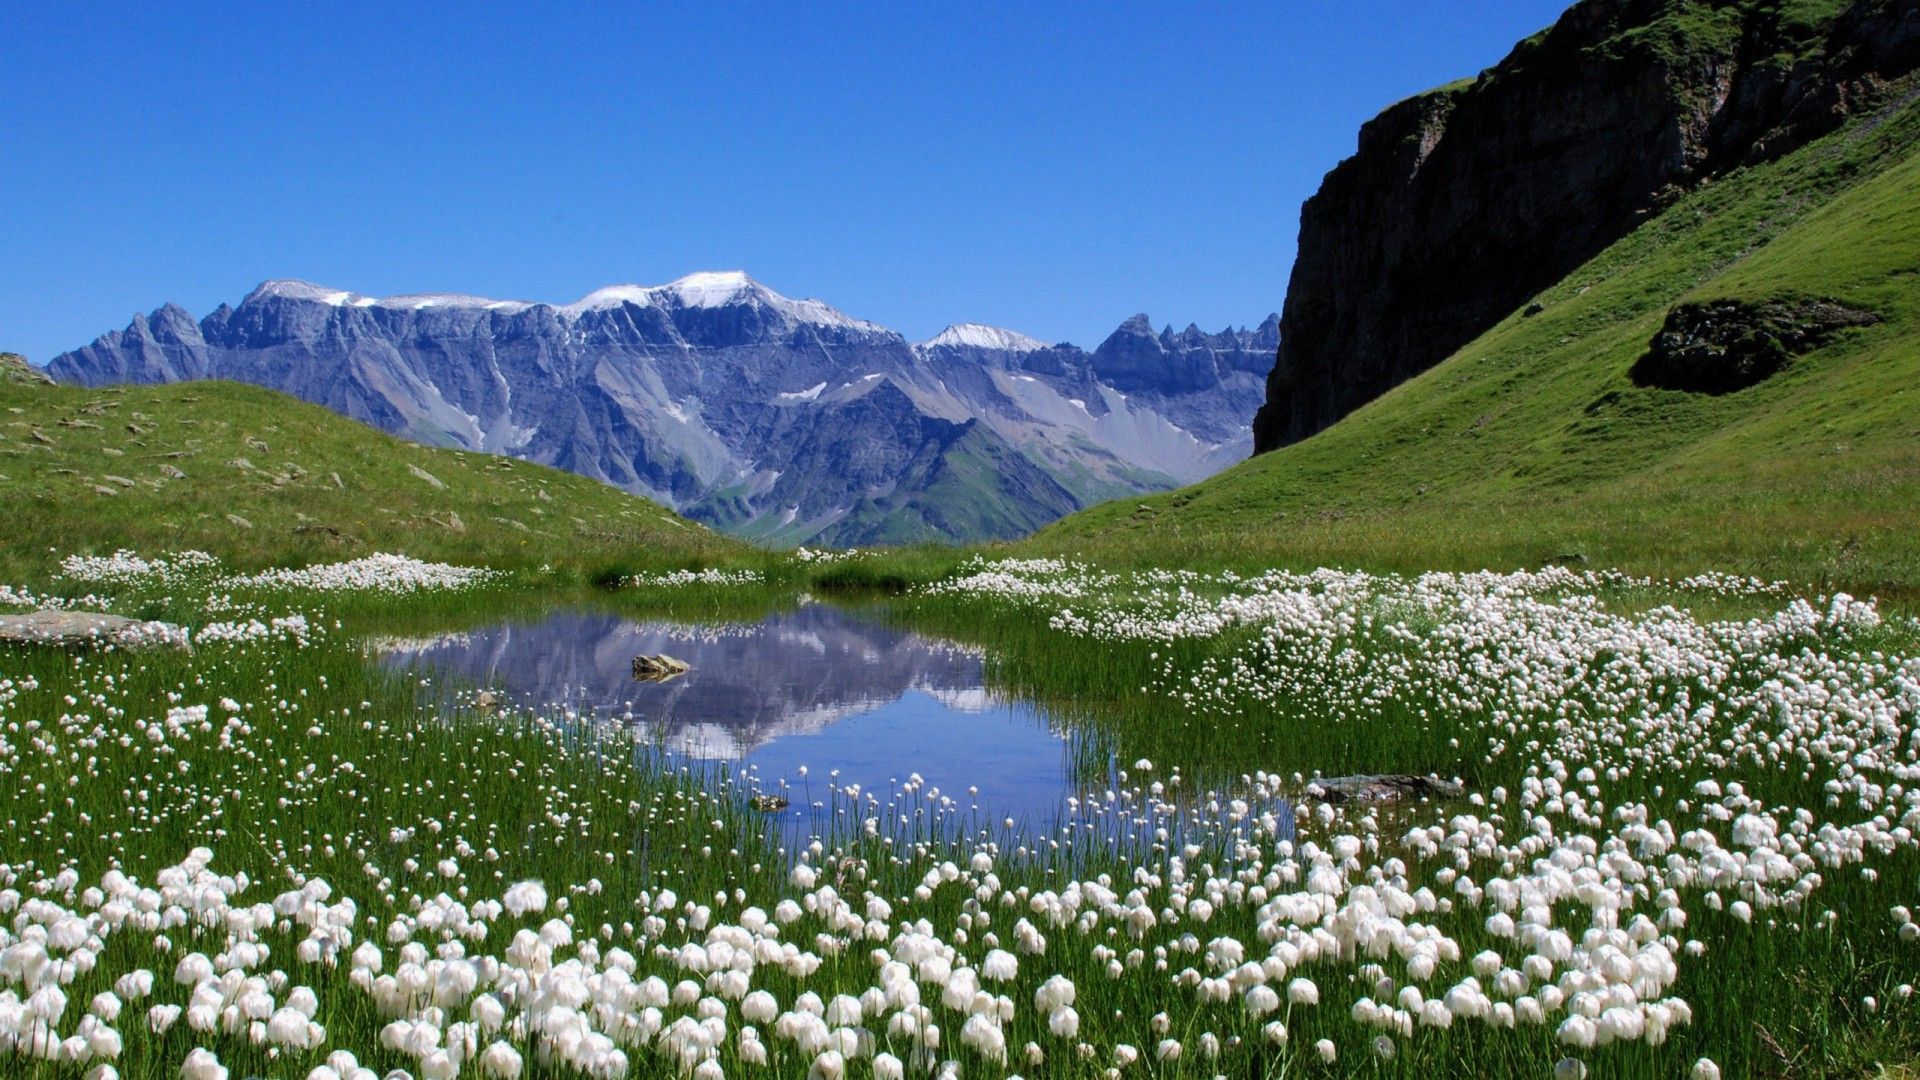 Switzerland Pictures in Summer | Live HD Wallpaper HQ Pictures ...